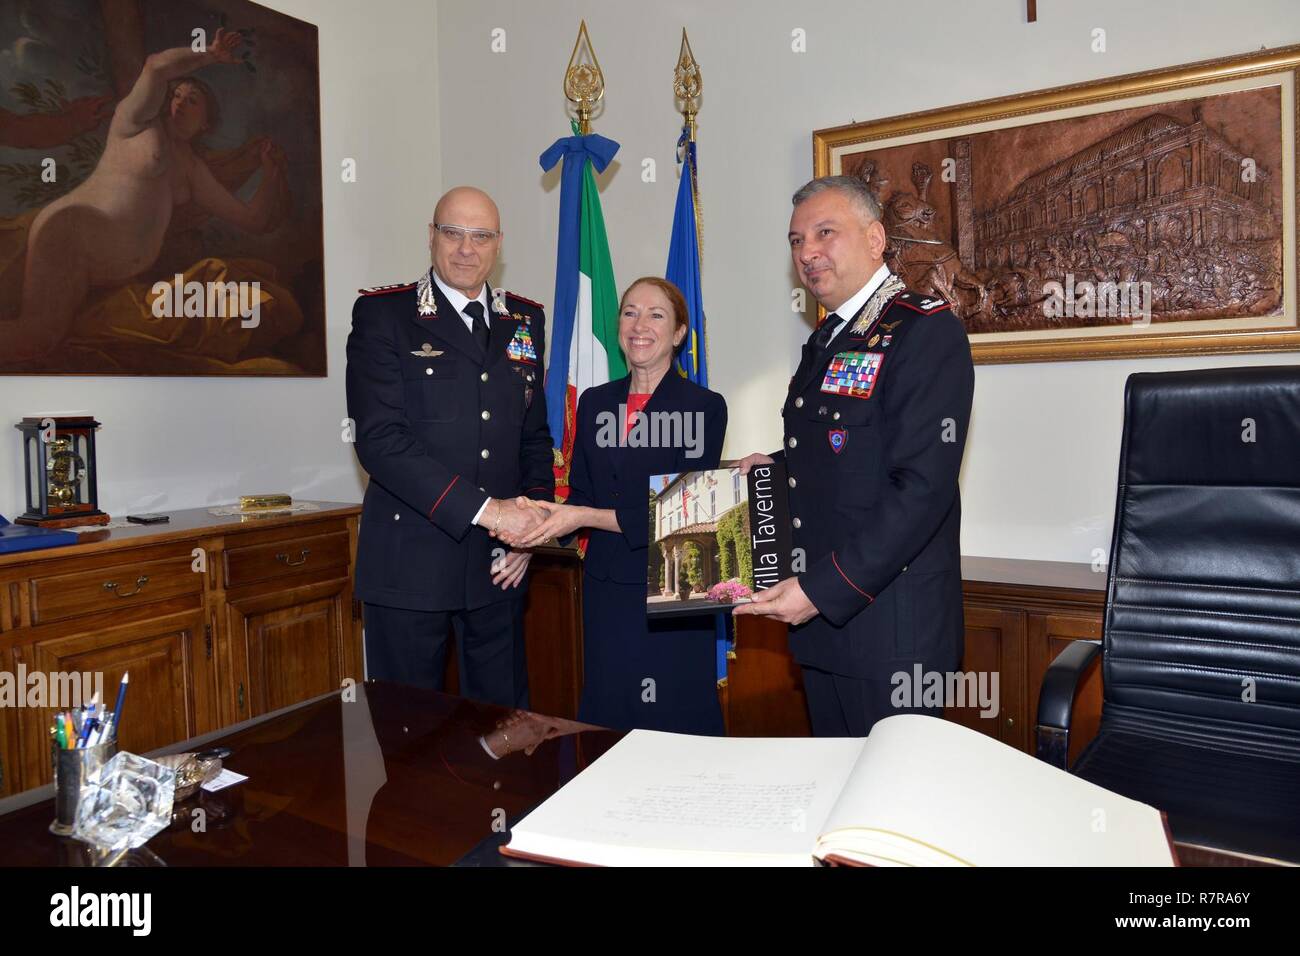 Lt. Gen Vincenzo Coppola (left), Commanding General “Palidoro” Carabinieri Specialized, Brig. Gen. Giovanni Pietro Barbano Center of Excellence for Stability Police Units (CoESPU) director (right), receives a gift from Ms. Kelly Degnan, Charge’ d’Affaires ad interim U.S. Embassy & Consulates Italy, during visit at Center of Excellence for Stability Police Units (CoESPU) Vicenza, Italy, Mar. 30, 2017. Stock Photo